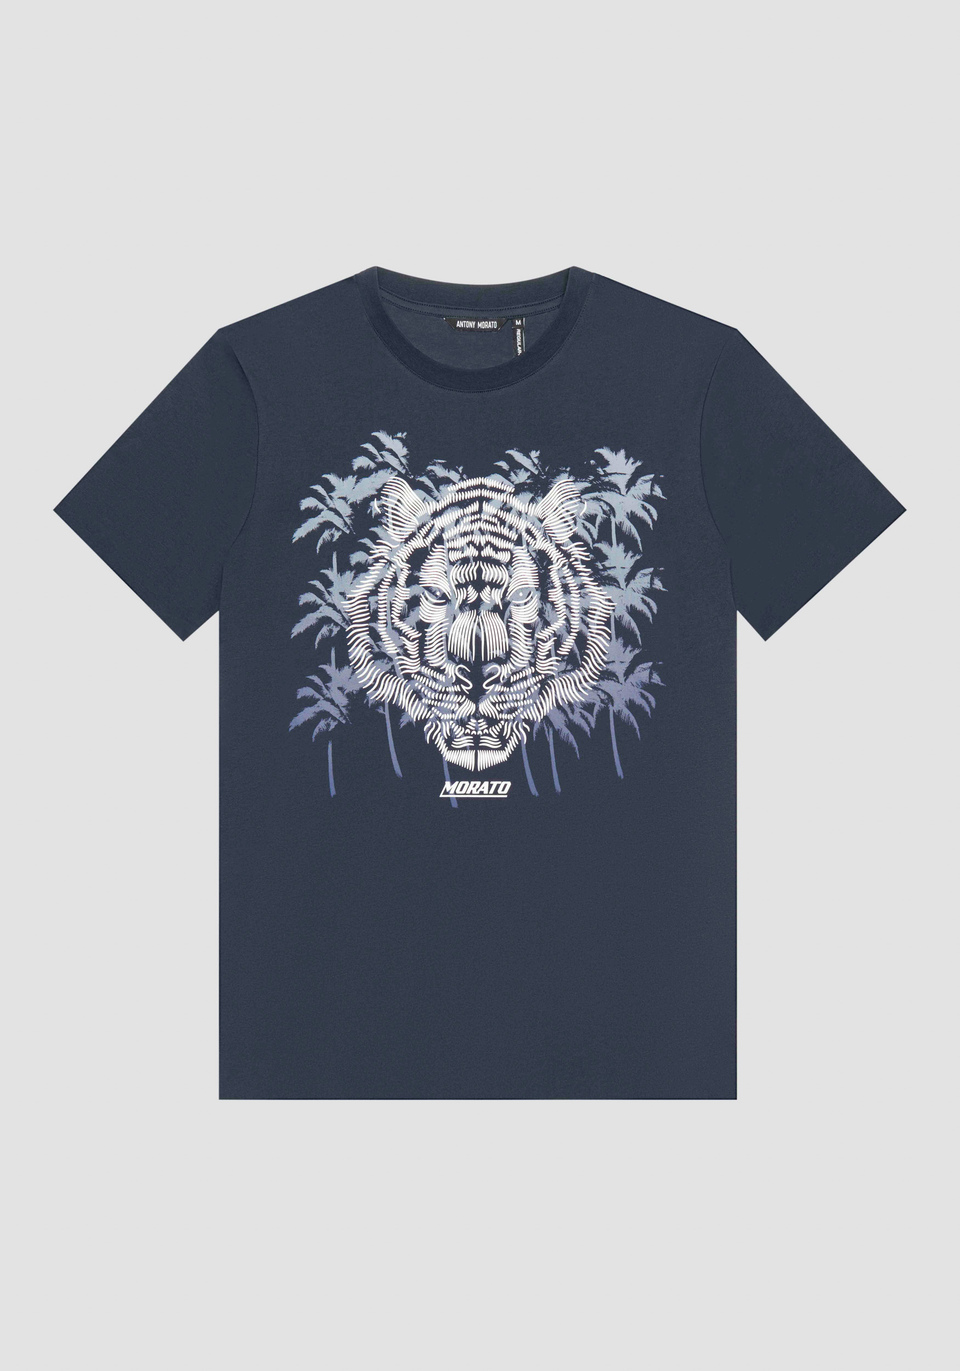 COTTON REGULAR FIT T-SHIRT WITH TIGER PRINT AND RUBBERIZED INJECTION MOLDED LOGO - Antony Morato Online Shop